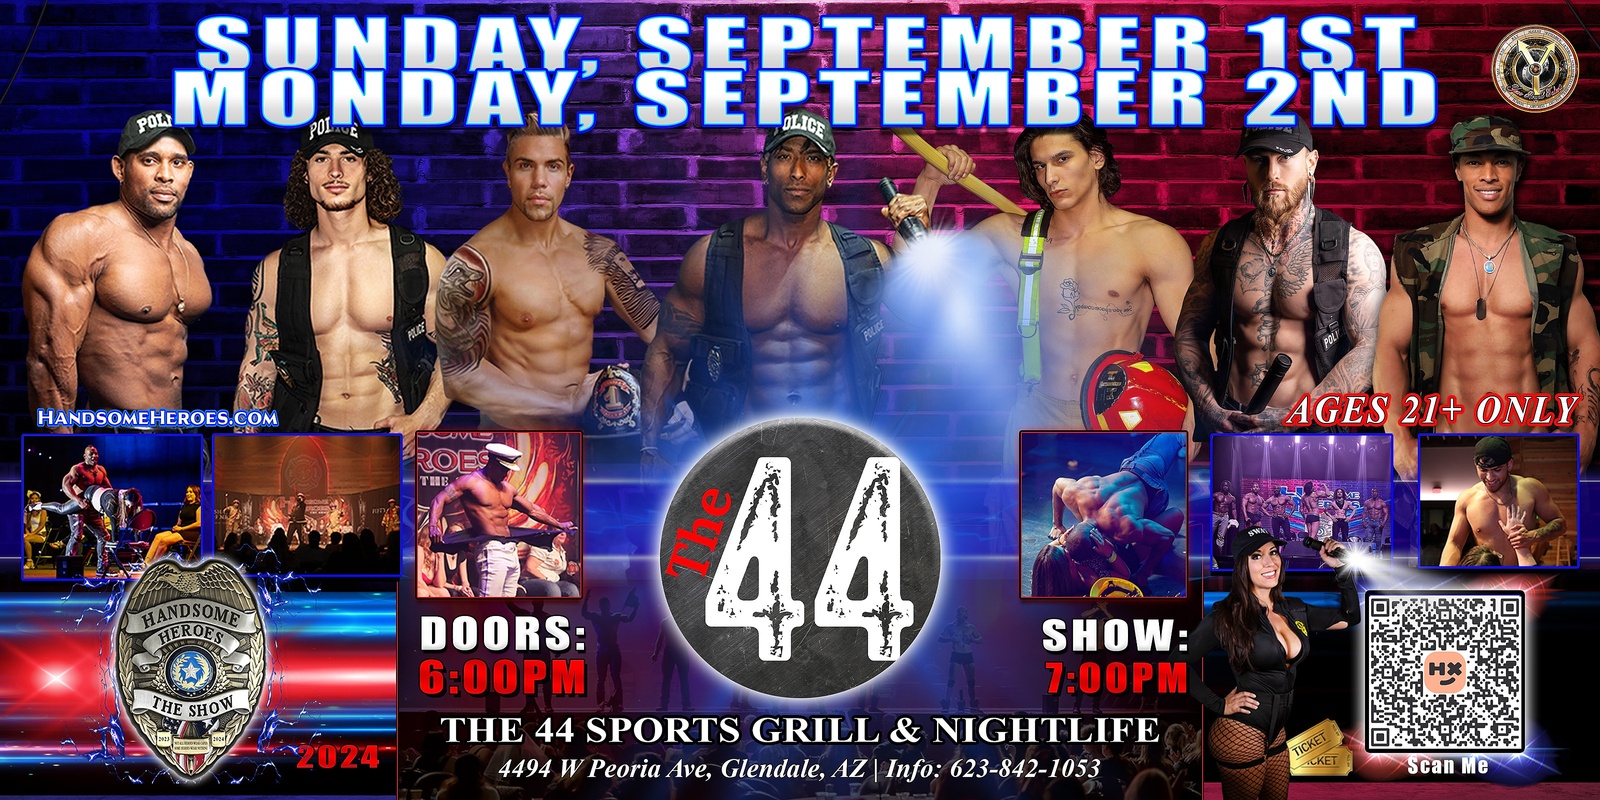 Banner image for Glendale, AZ - Handsome Heroes: The Show @ The 44 Sports Grill & Nightlife "Good Girls Go to Heaven, Bad Girls Leave in Handcuffs!"